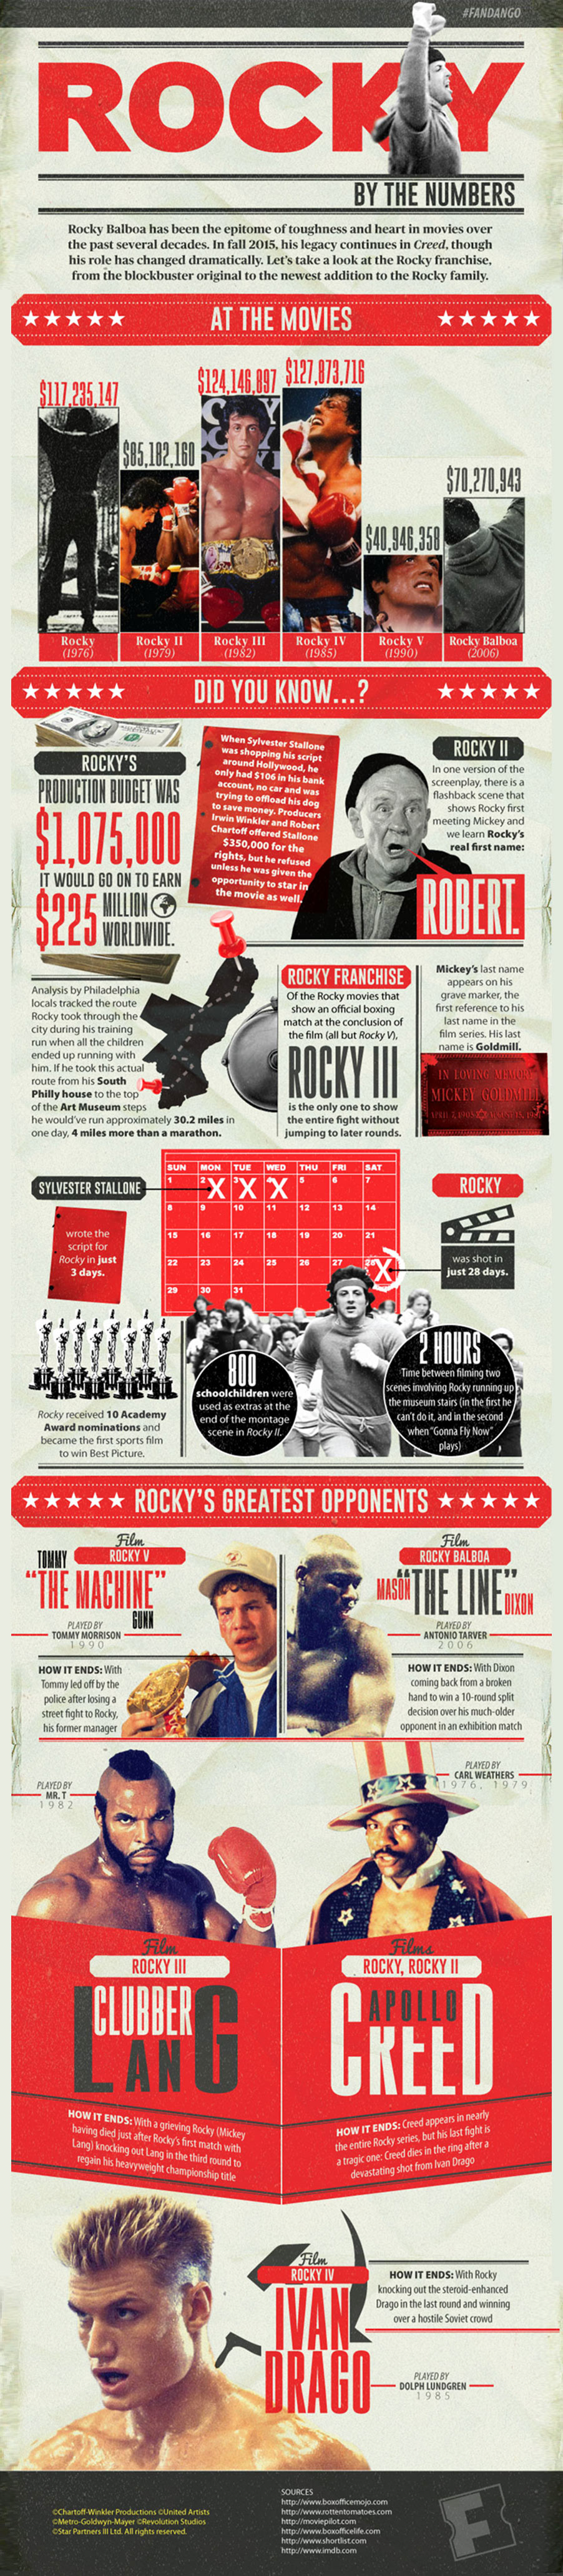 Rocky By the Numbers - Movie Infographic